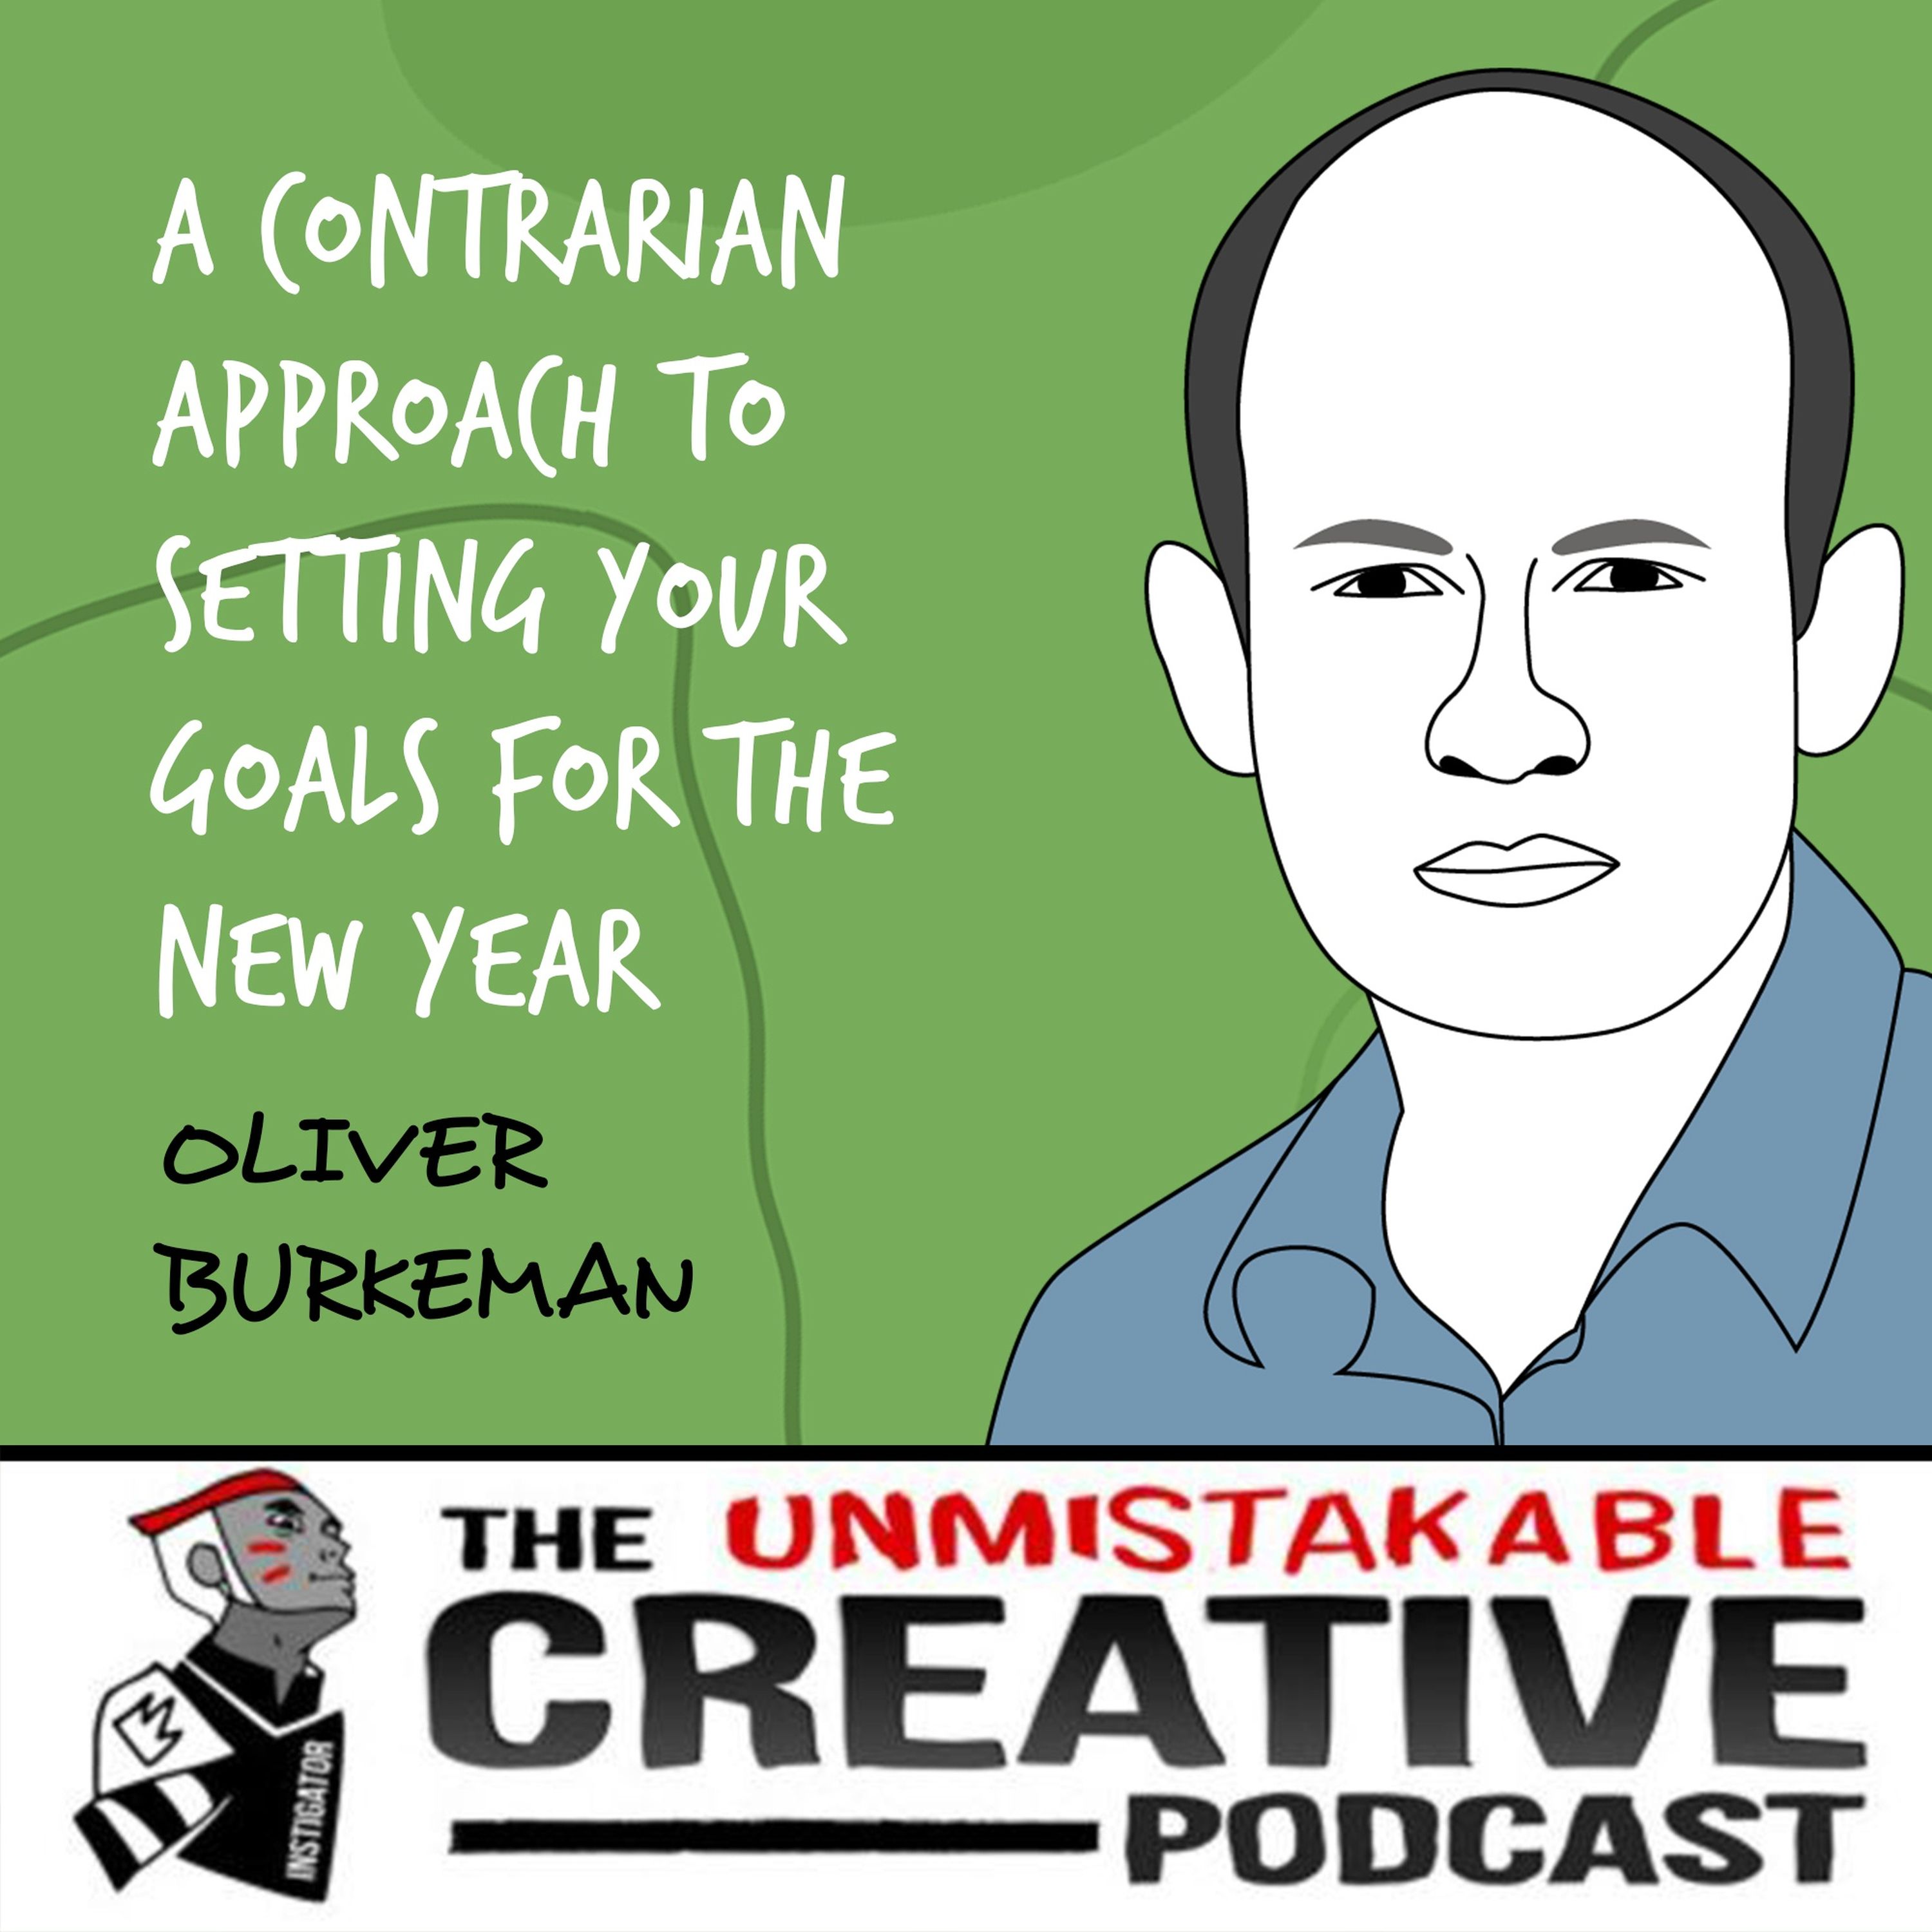 Oliver Burkeman | A Contrarian Approach to Setting Your Goals for the New Year Image